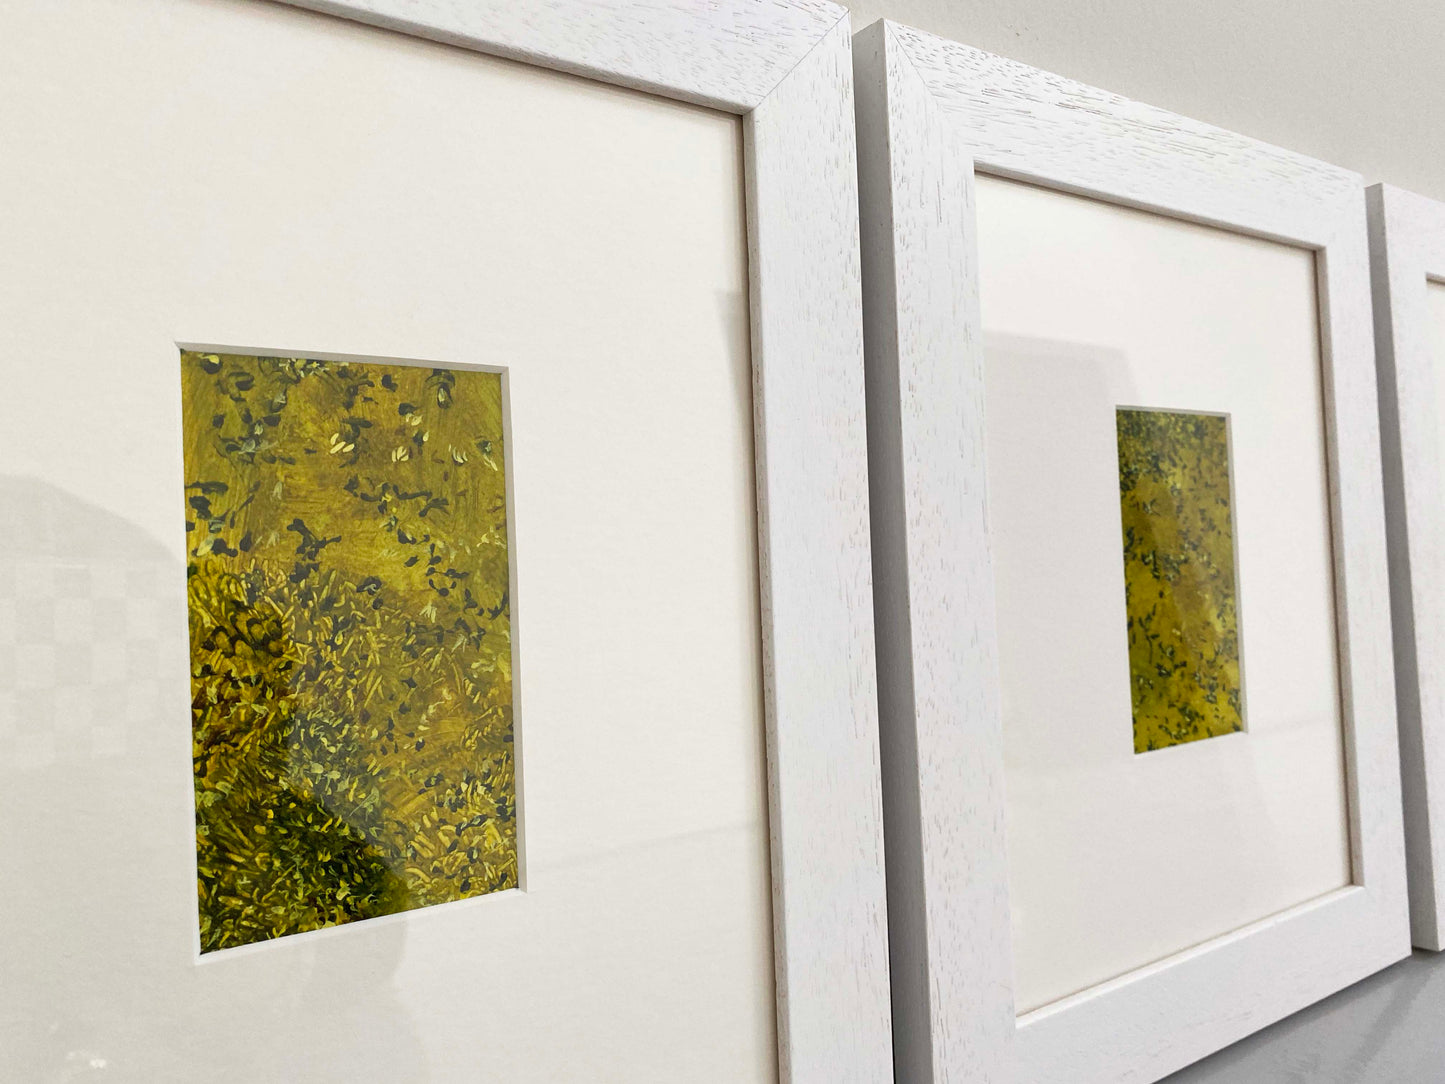 Tiny Memories of Moss Series by Helen Thomas